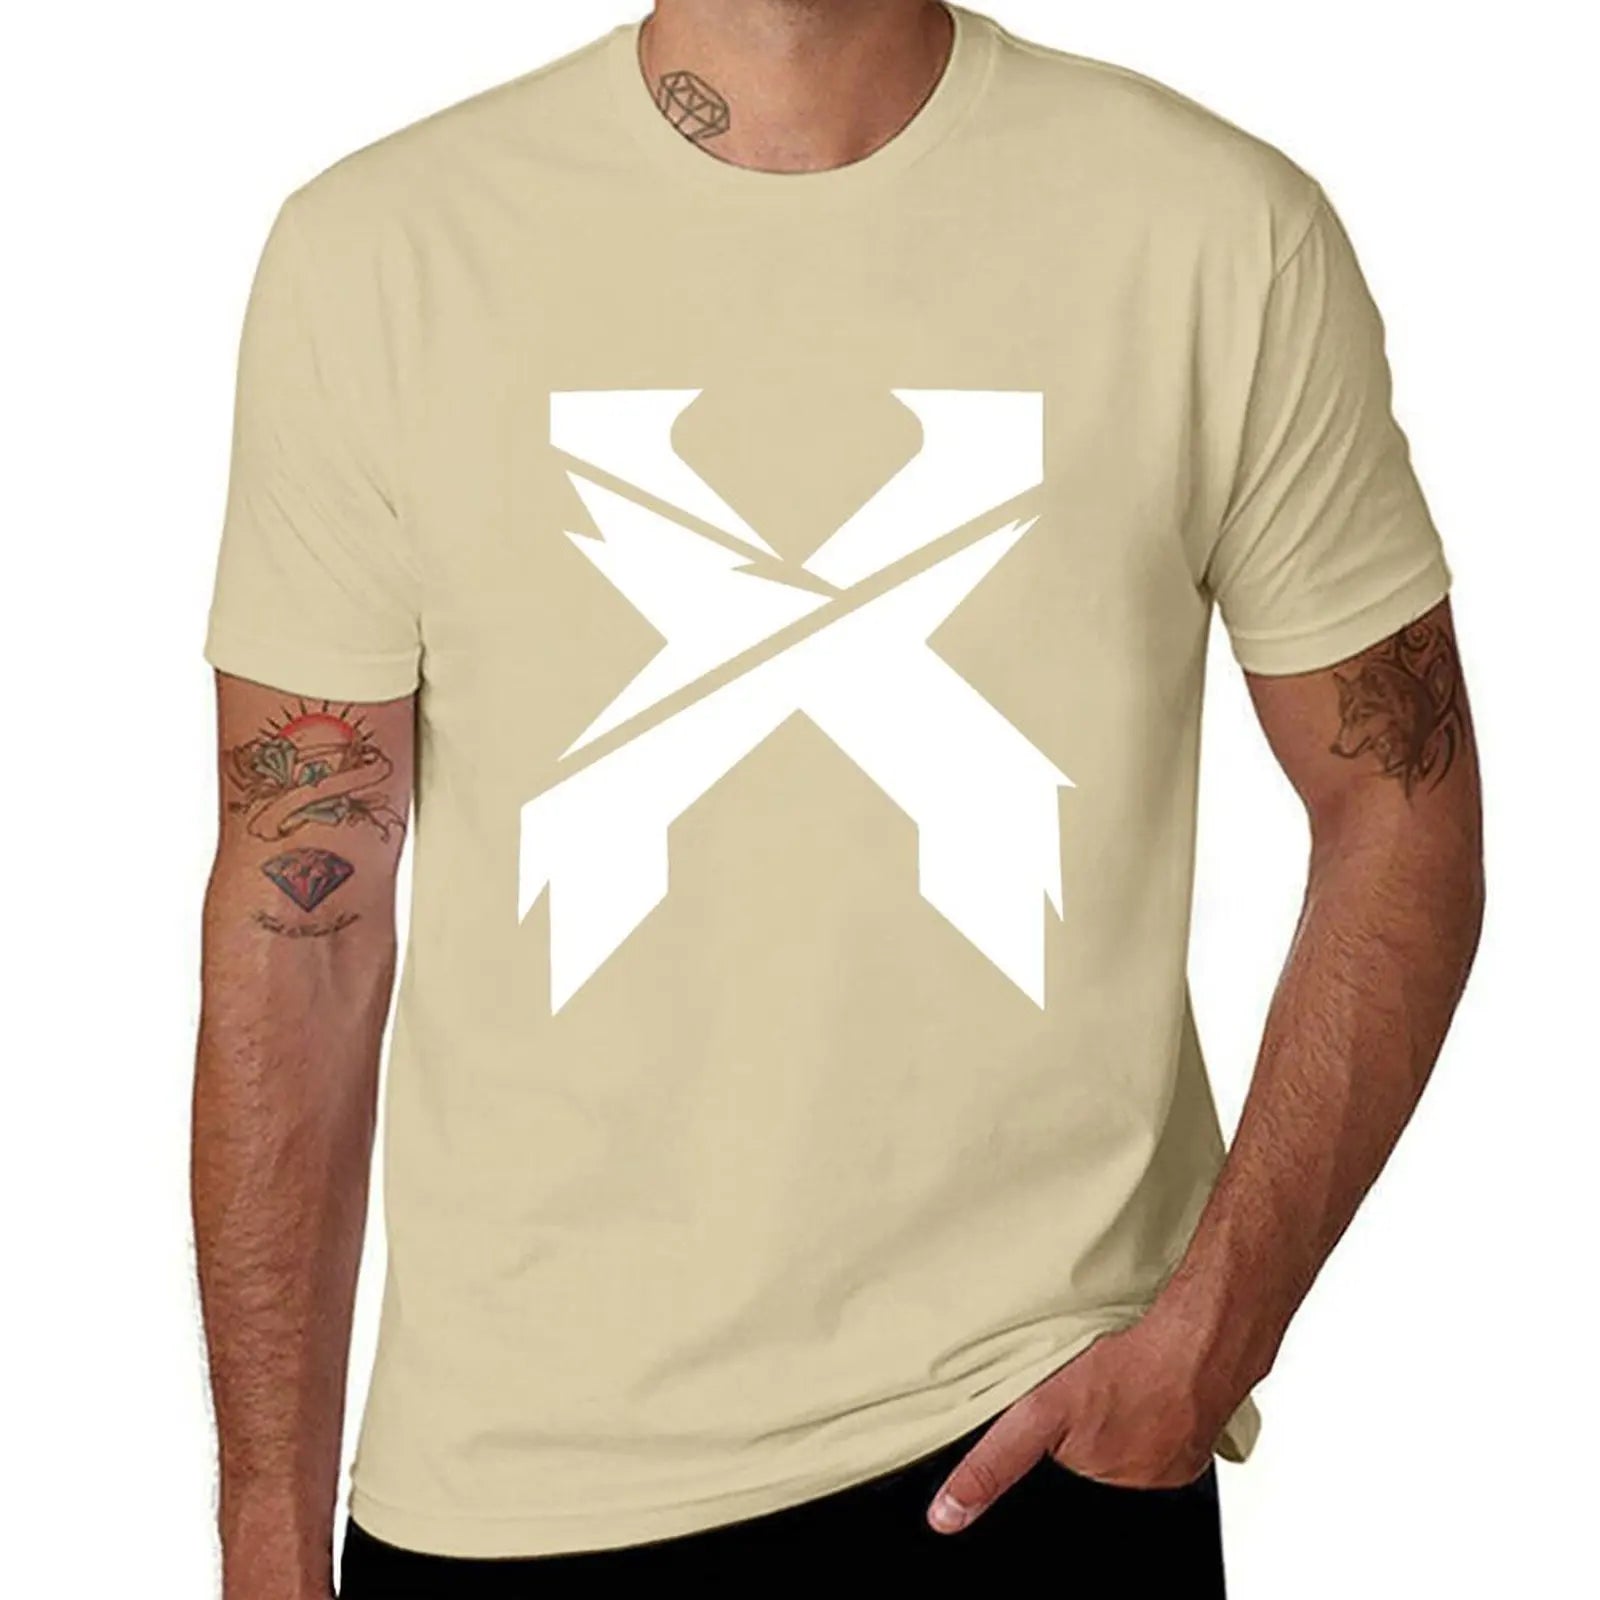 Excision Merch Excision Logo T - Shirt - The Rave Cave